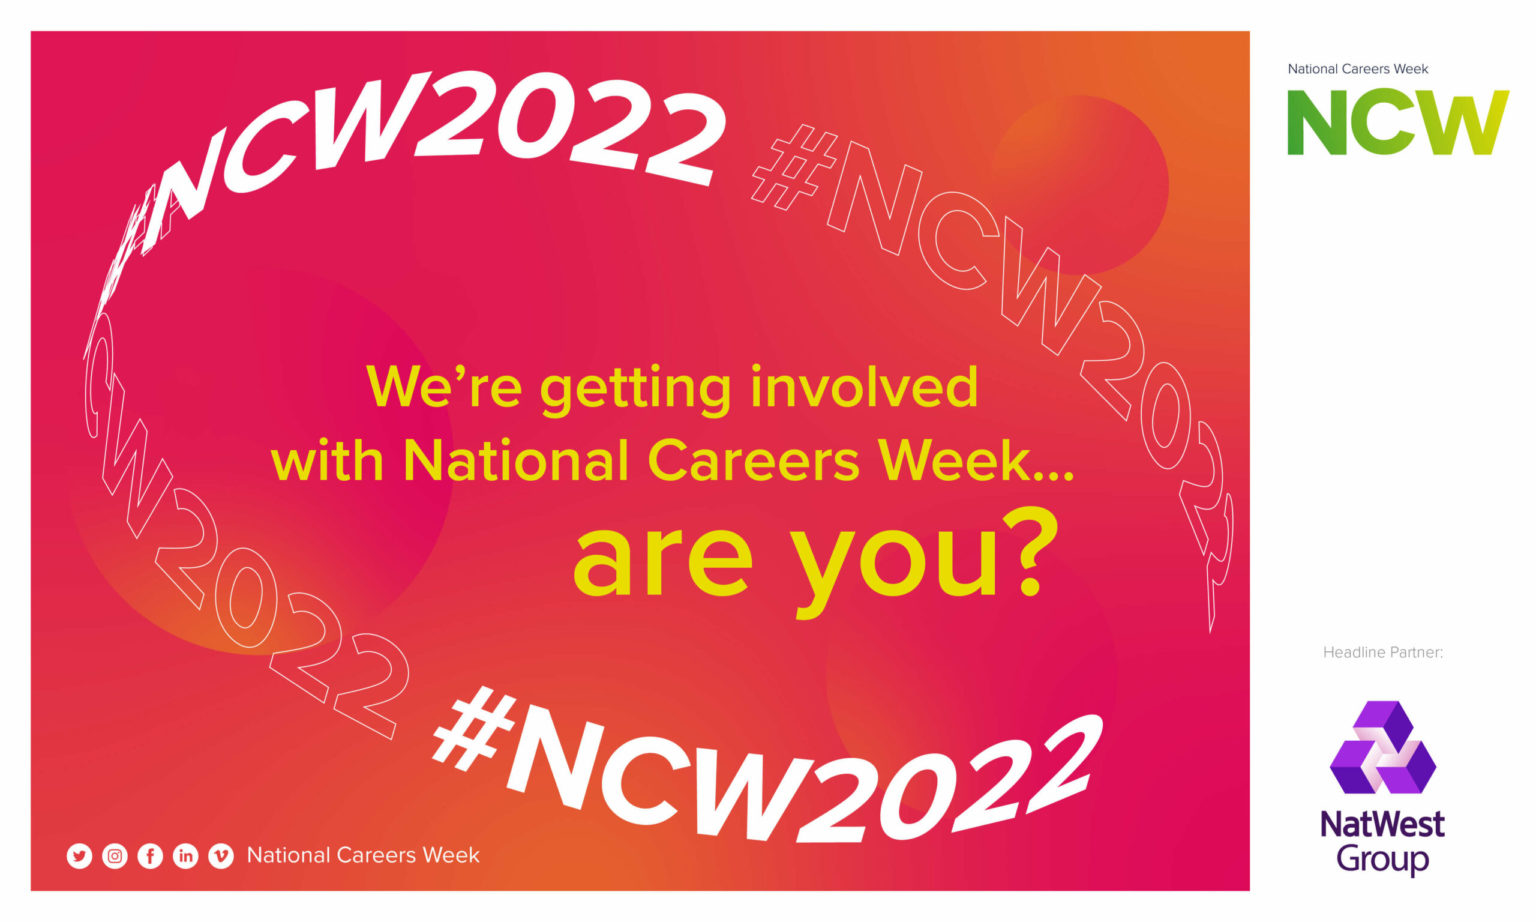 National Careers Week 712 March 2022 Get Involved! NCW2022